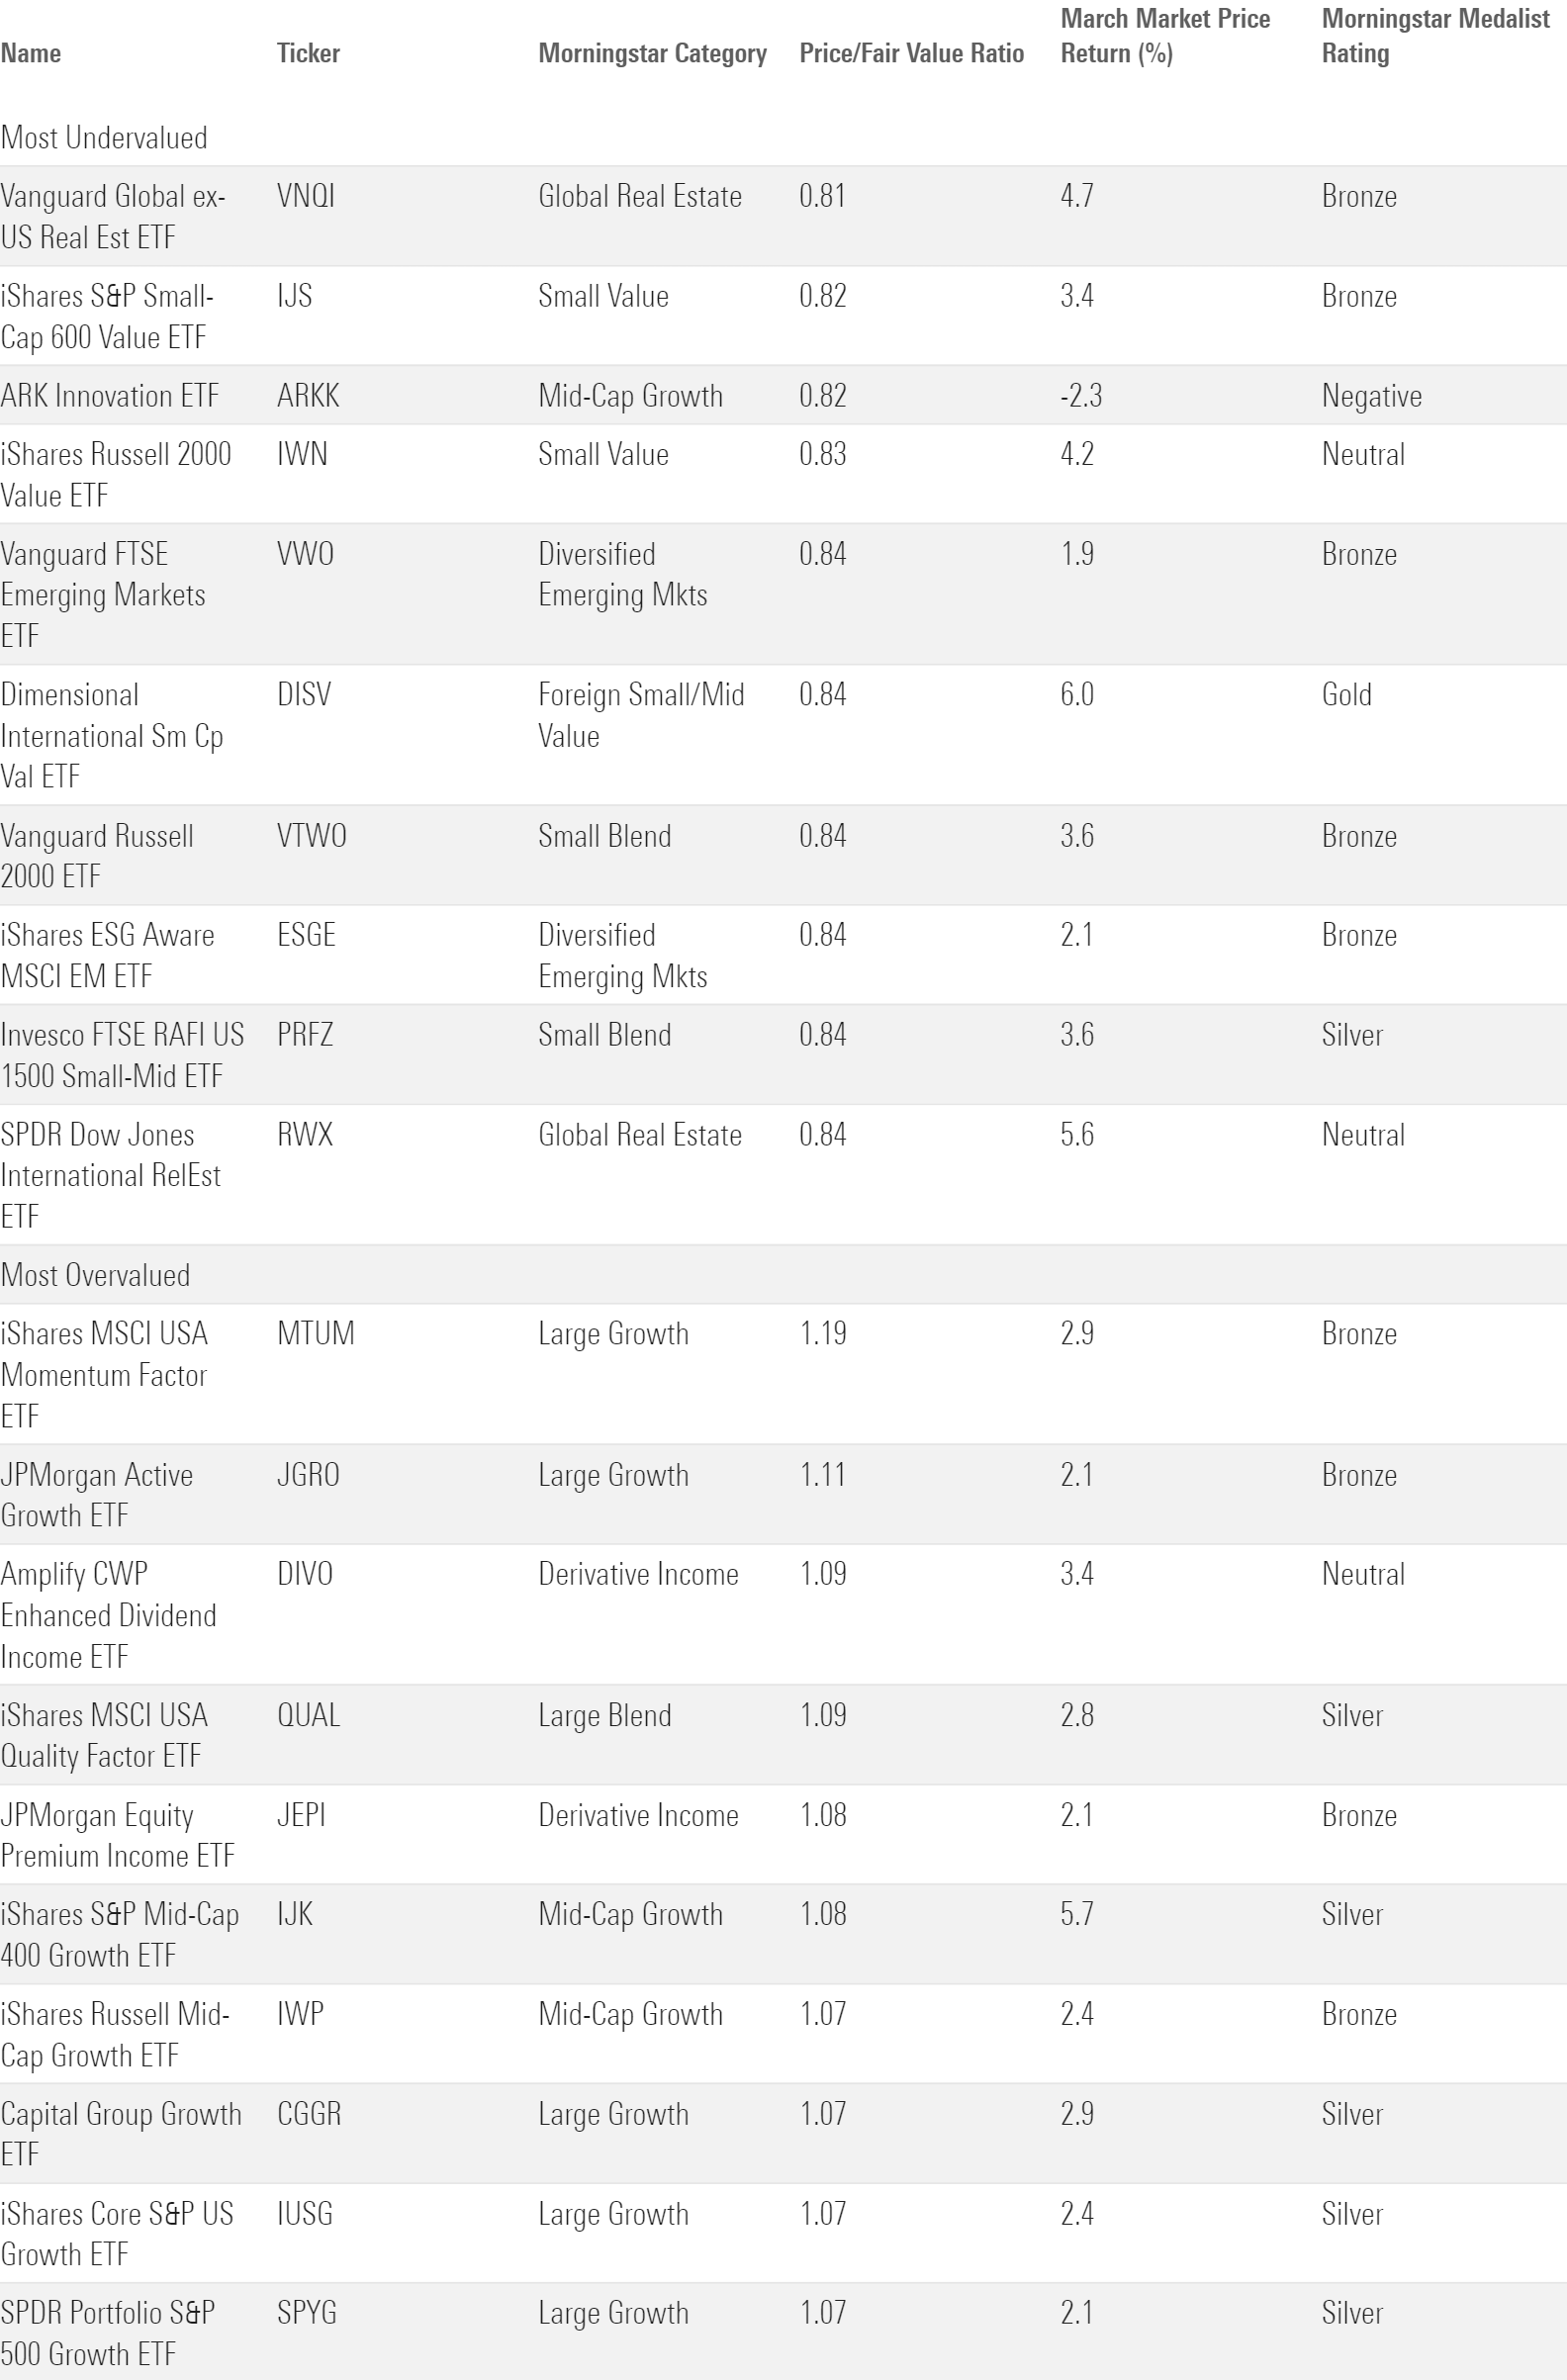 Table of the 10 most under- and overvalued US ETFs according to Morningstar's price/fair value ratio.